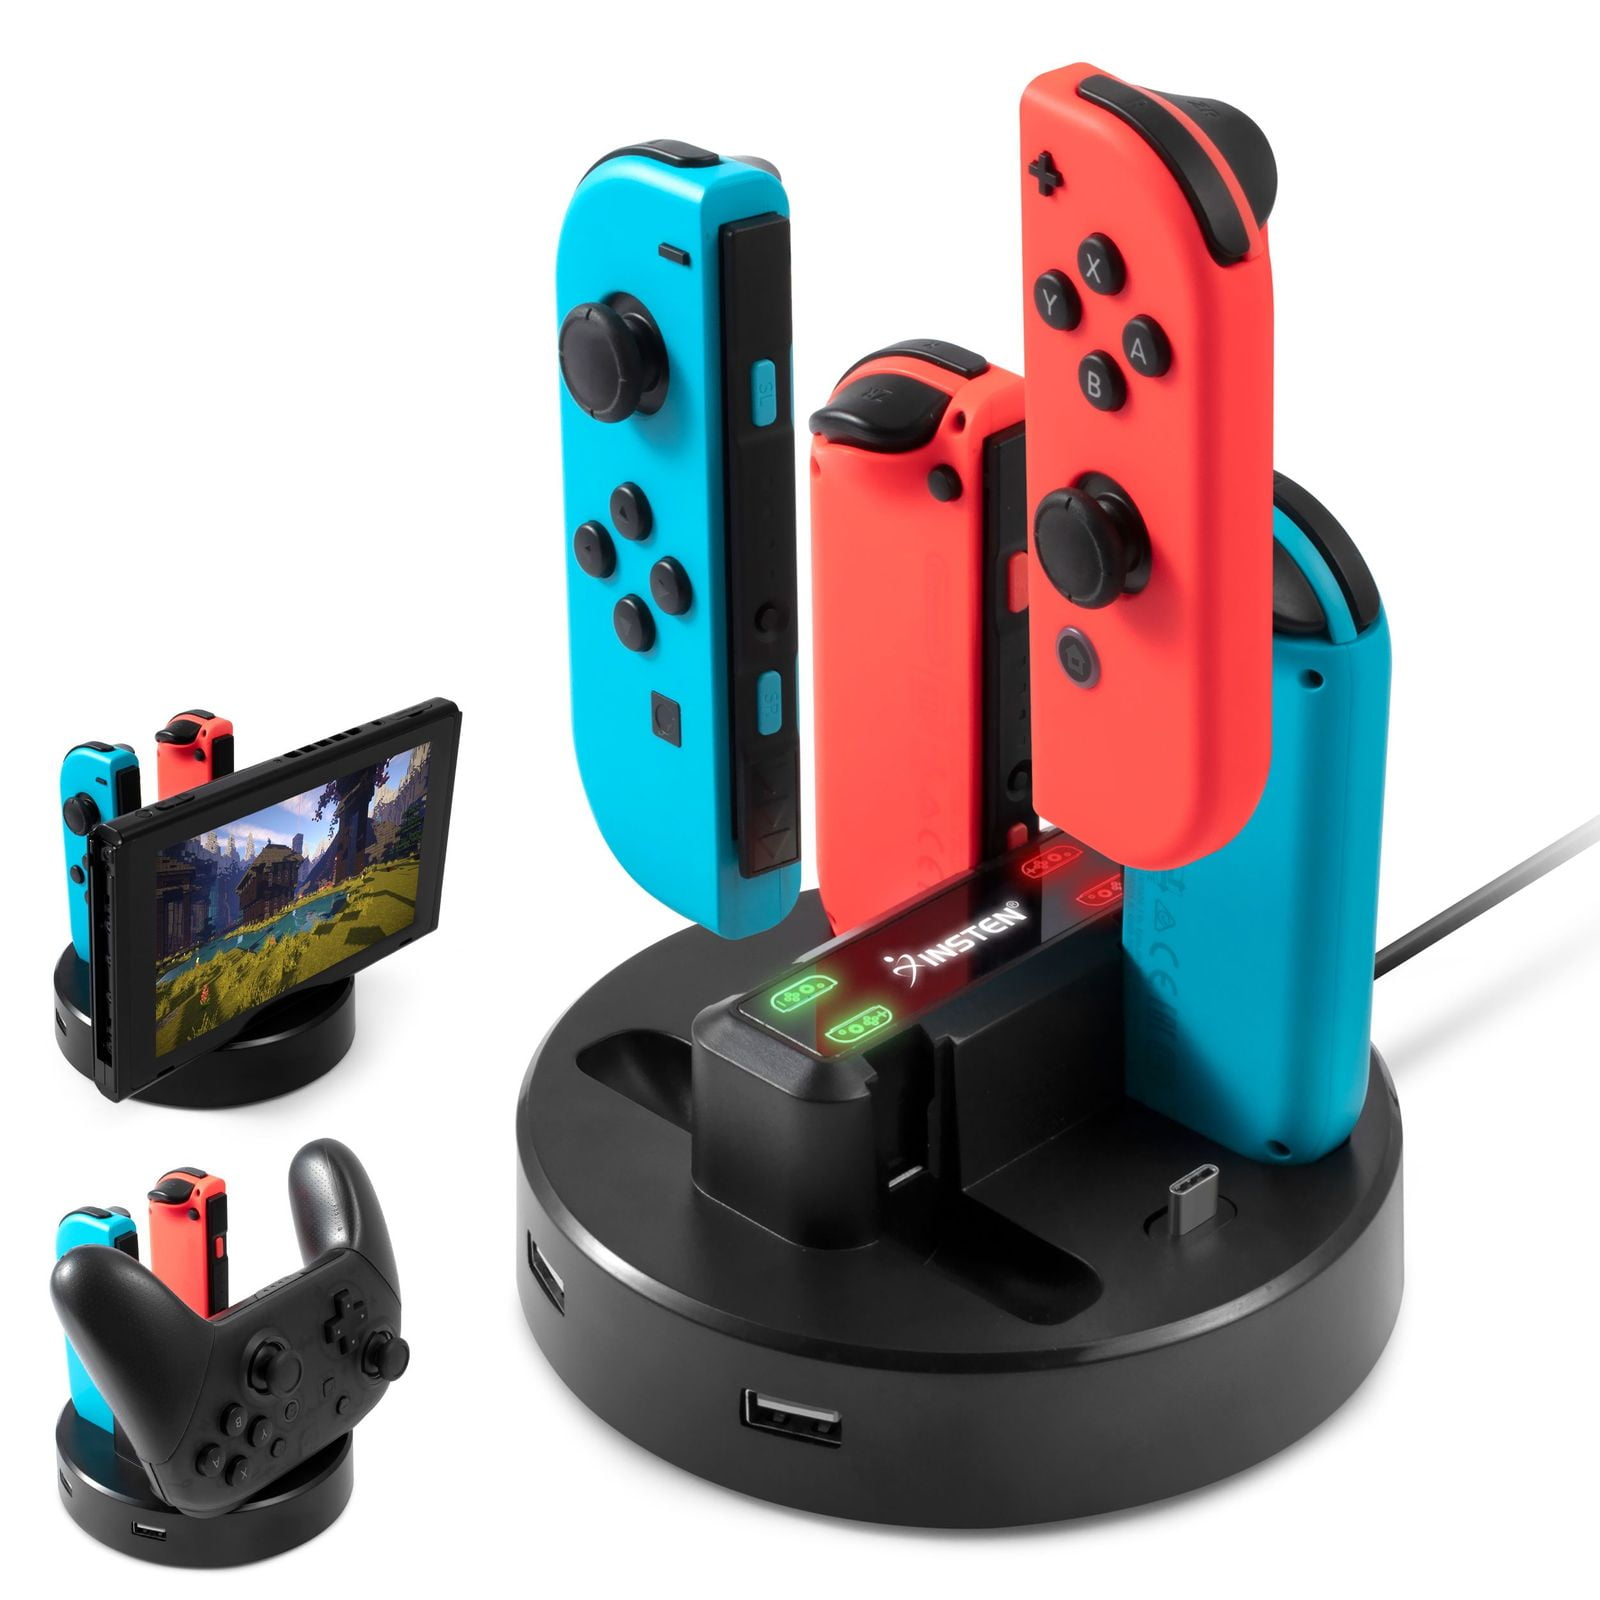 Insten Charging Dock Station For Nintendo Switch and OLED Model